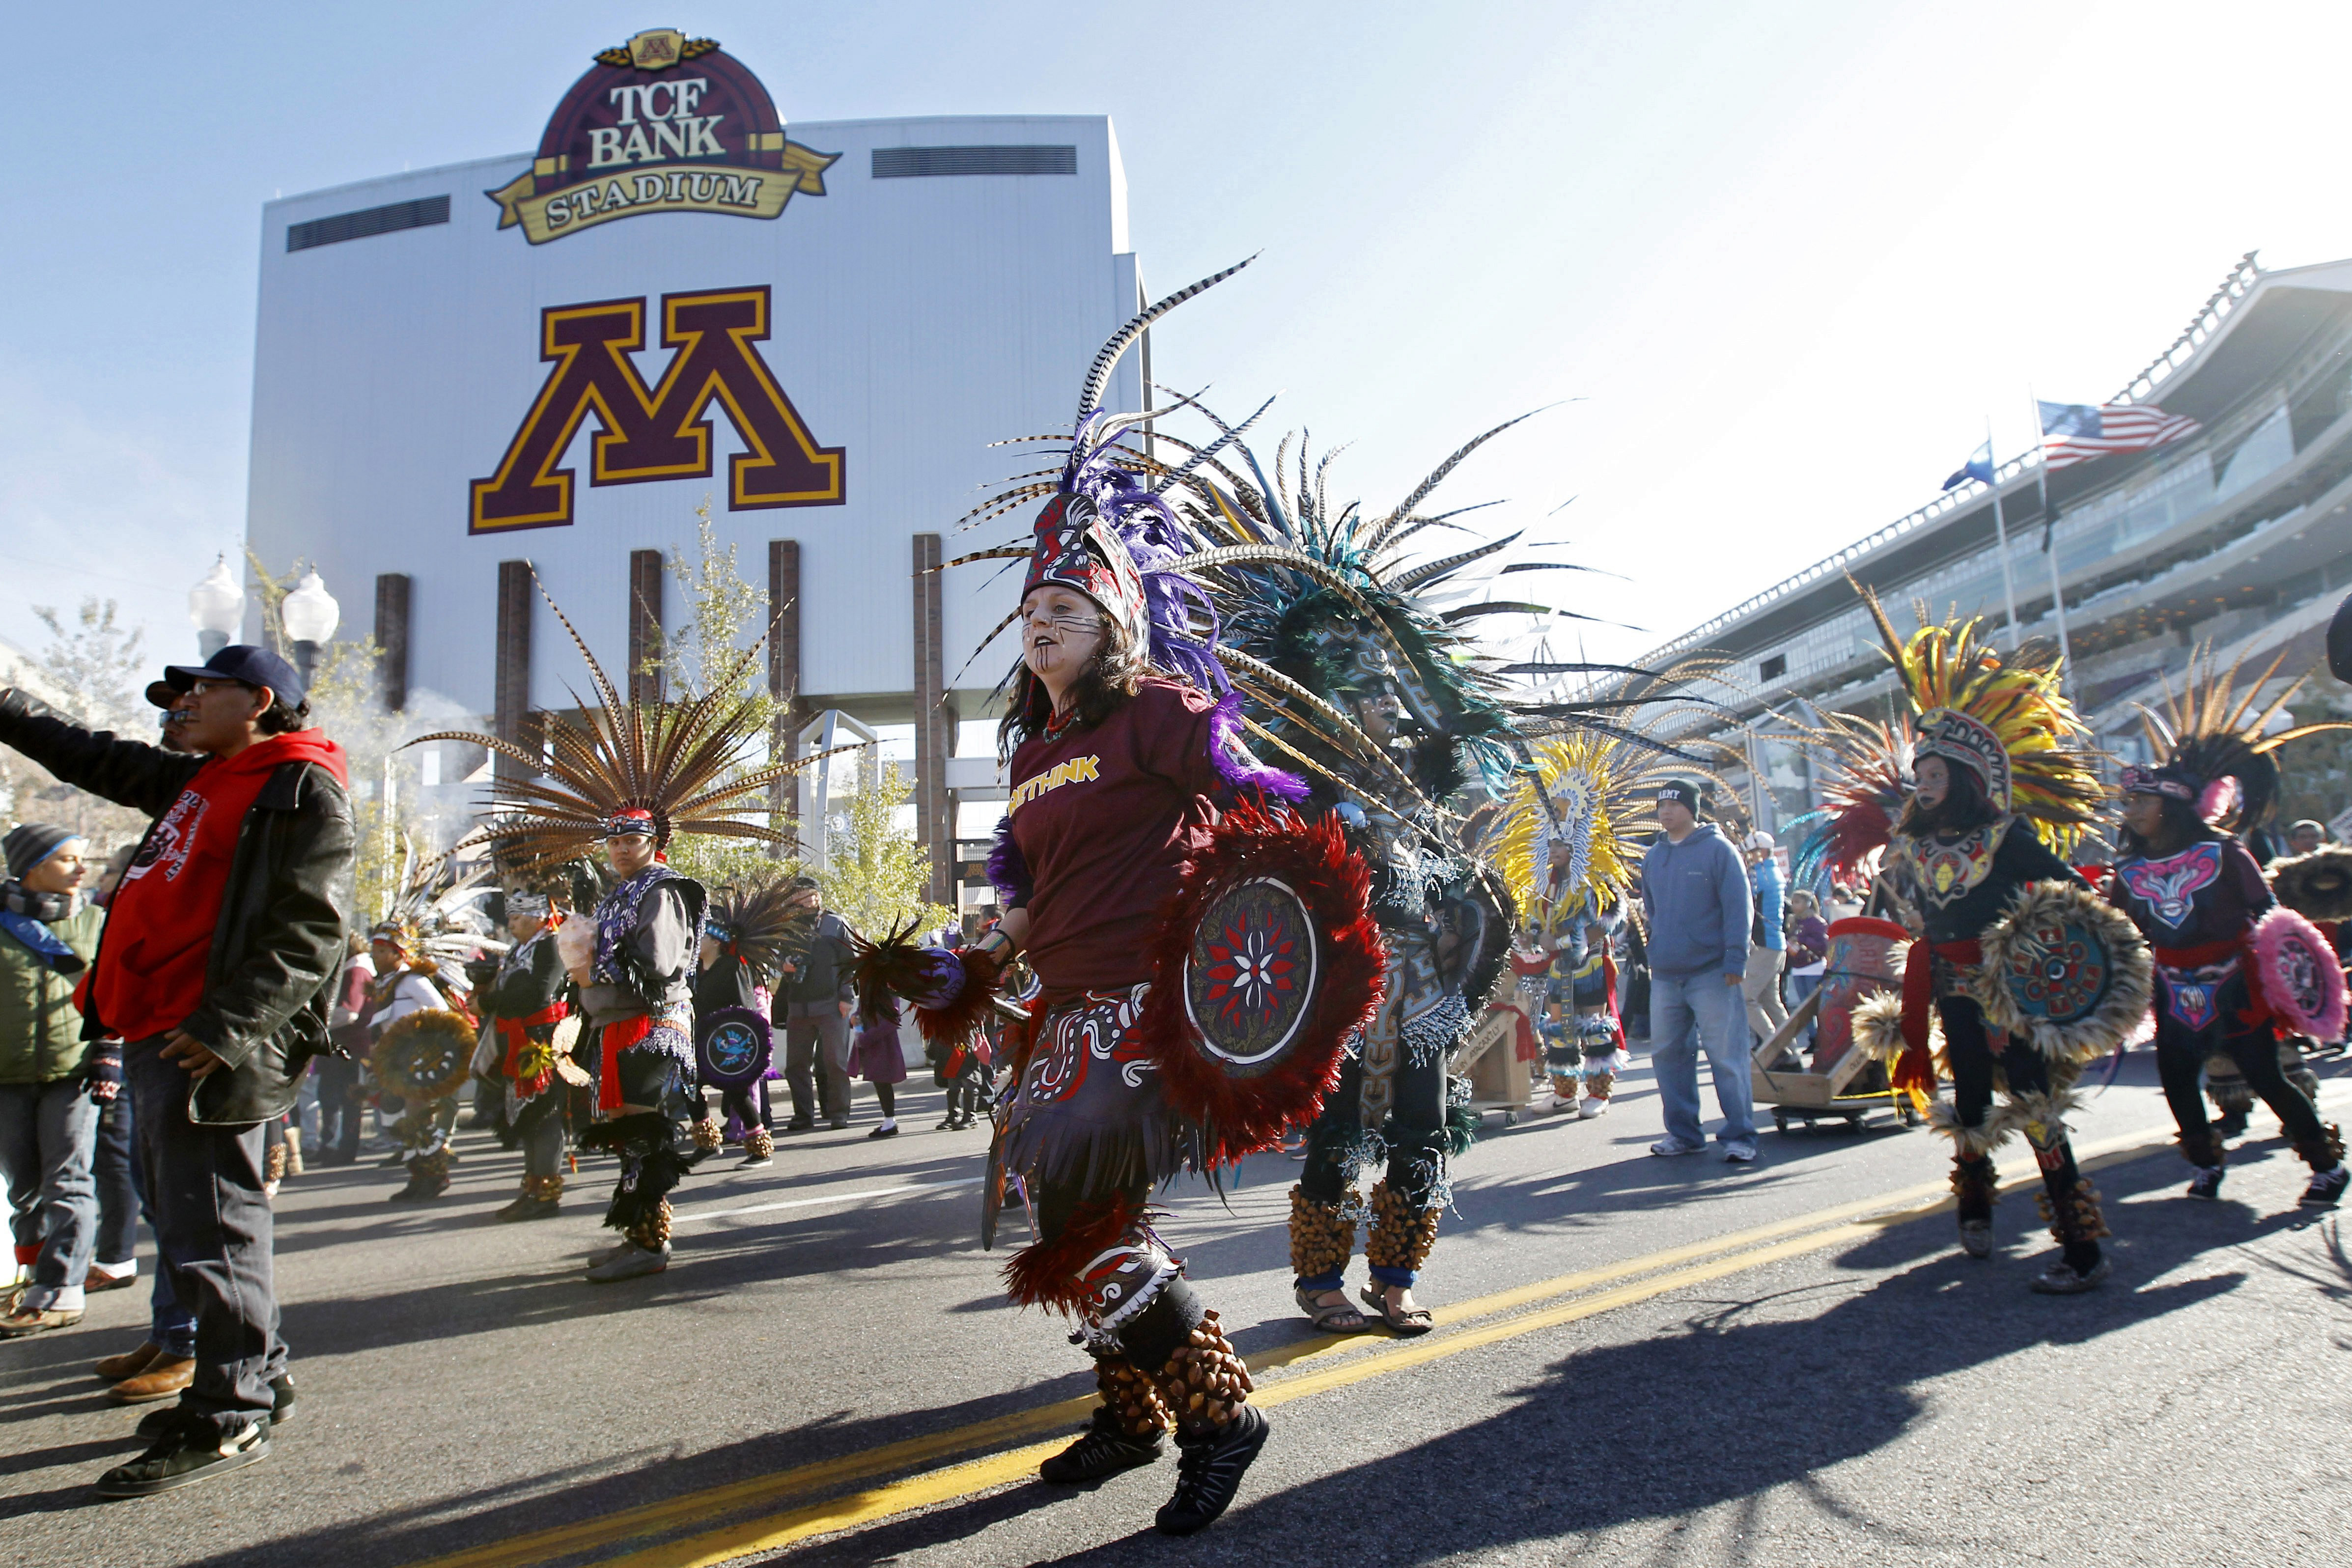 Protestors march outside TCF Bank Stadium before an NFL football game between the Minnesota Vikings and the Washington Redskins on Nov. 2, 2014, in Minneapolis.